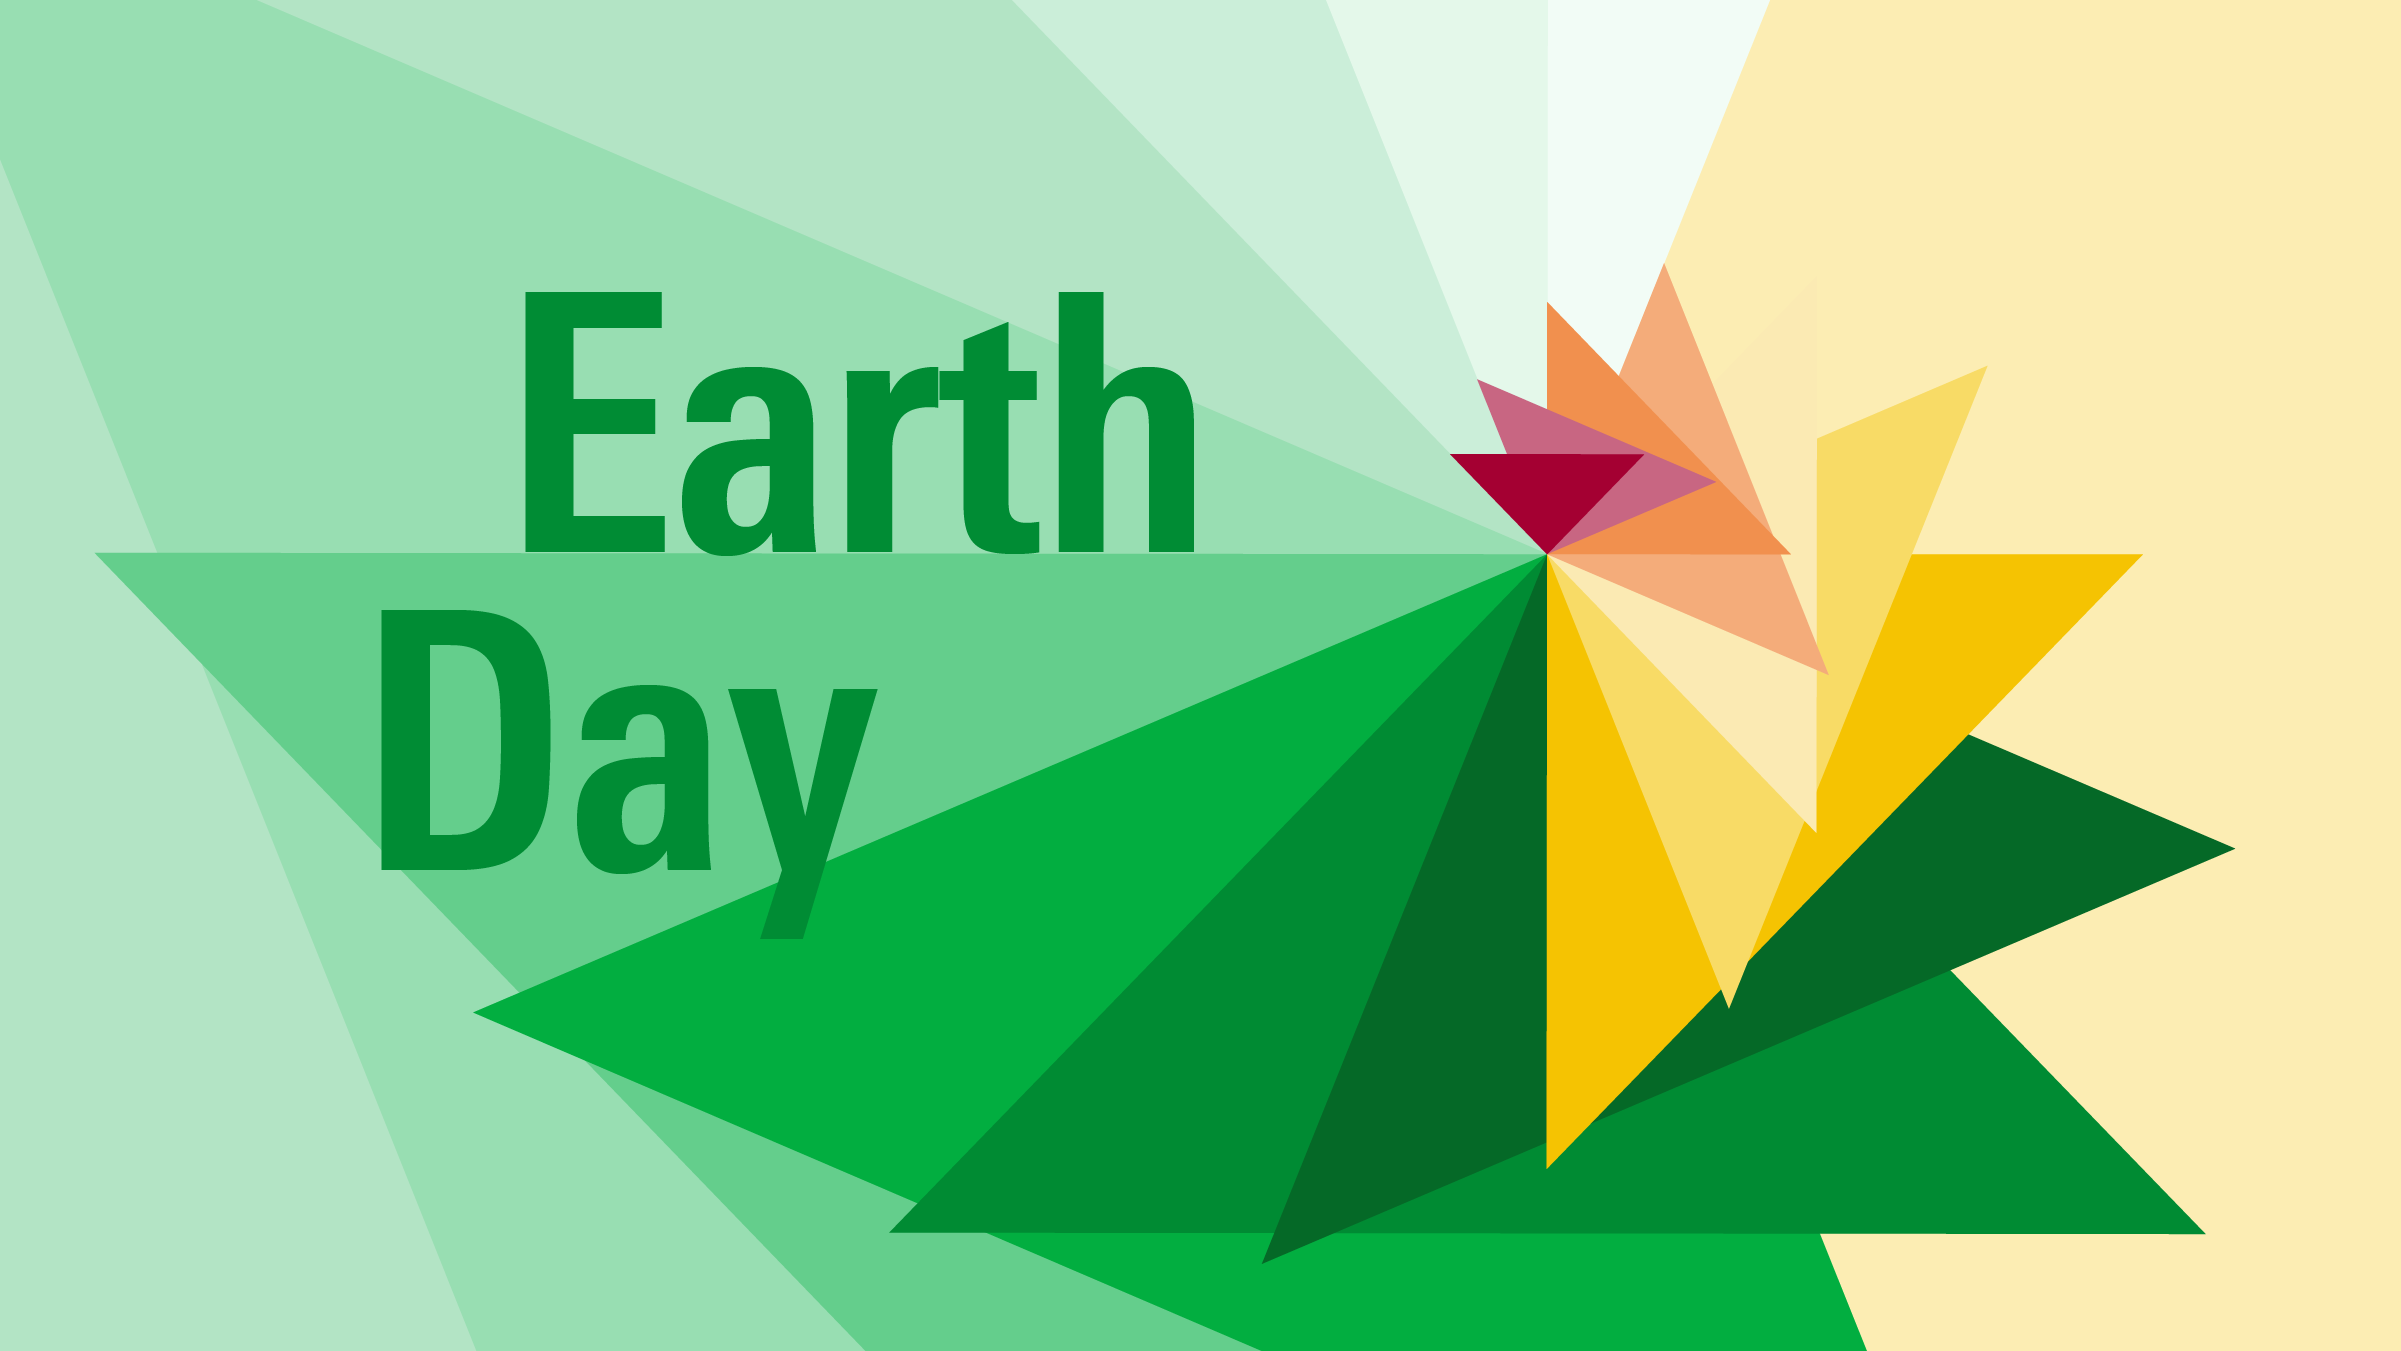 Illustration of green, yellow, red spiral with the title "Earth Day"